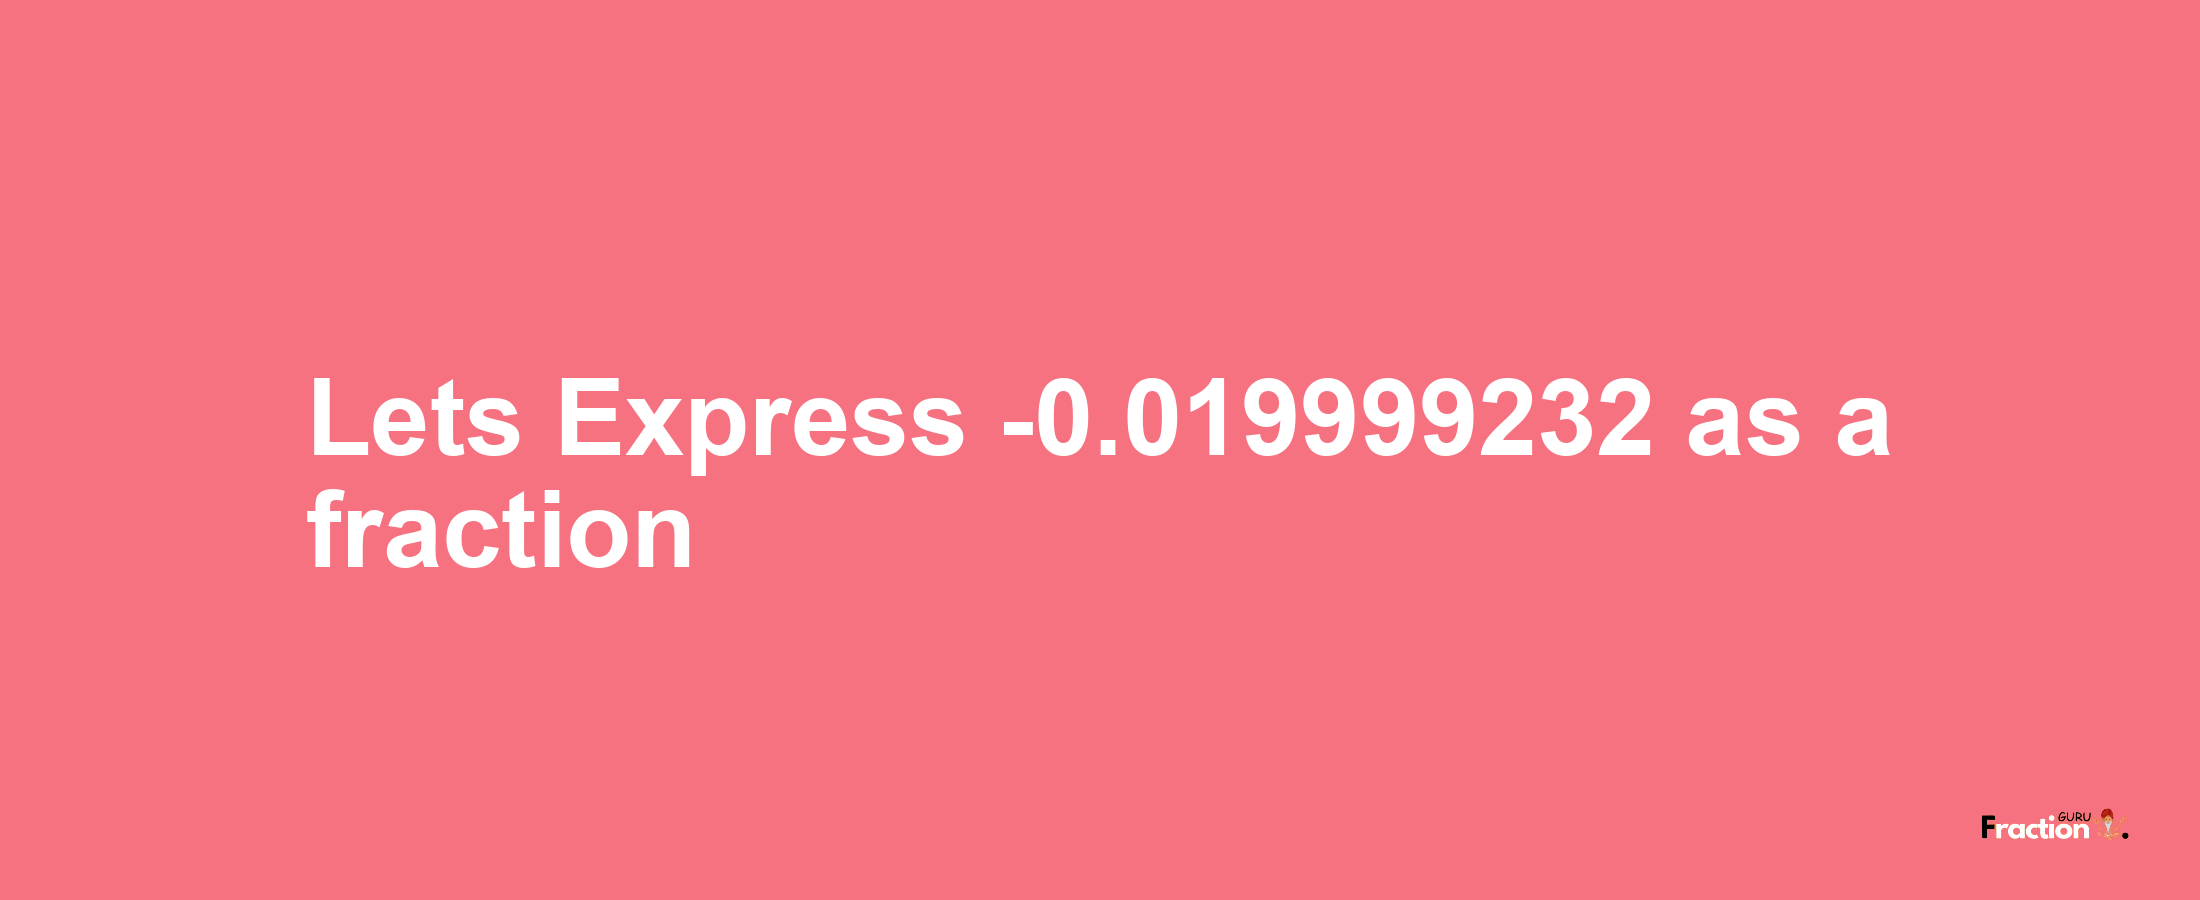 Lets Express -0.019999232 as afraction